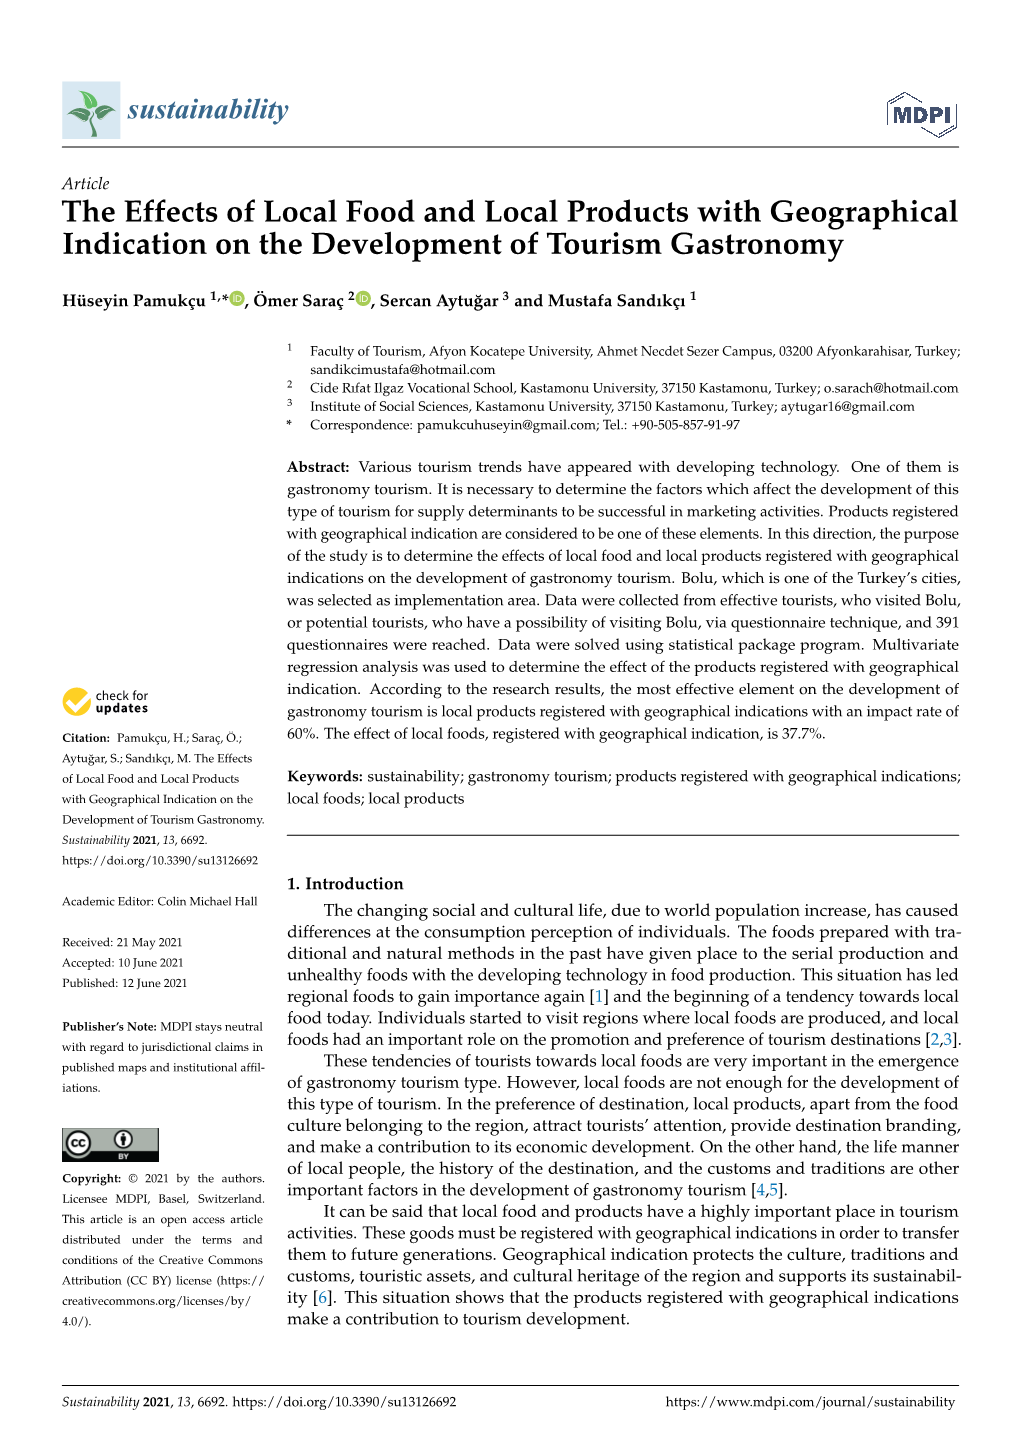 The Effects of Local Food and Local Products with Geographical Indication on the Development of Tourism Gastronomy